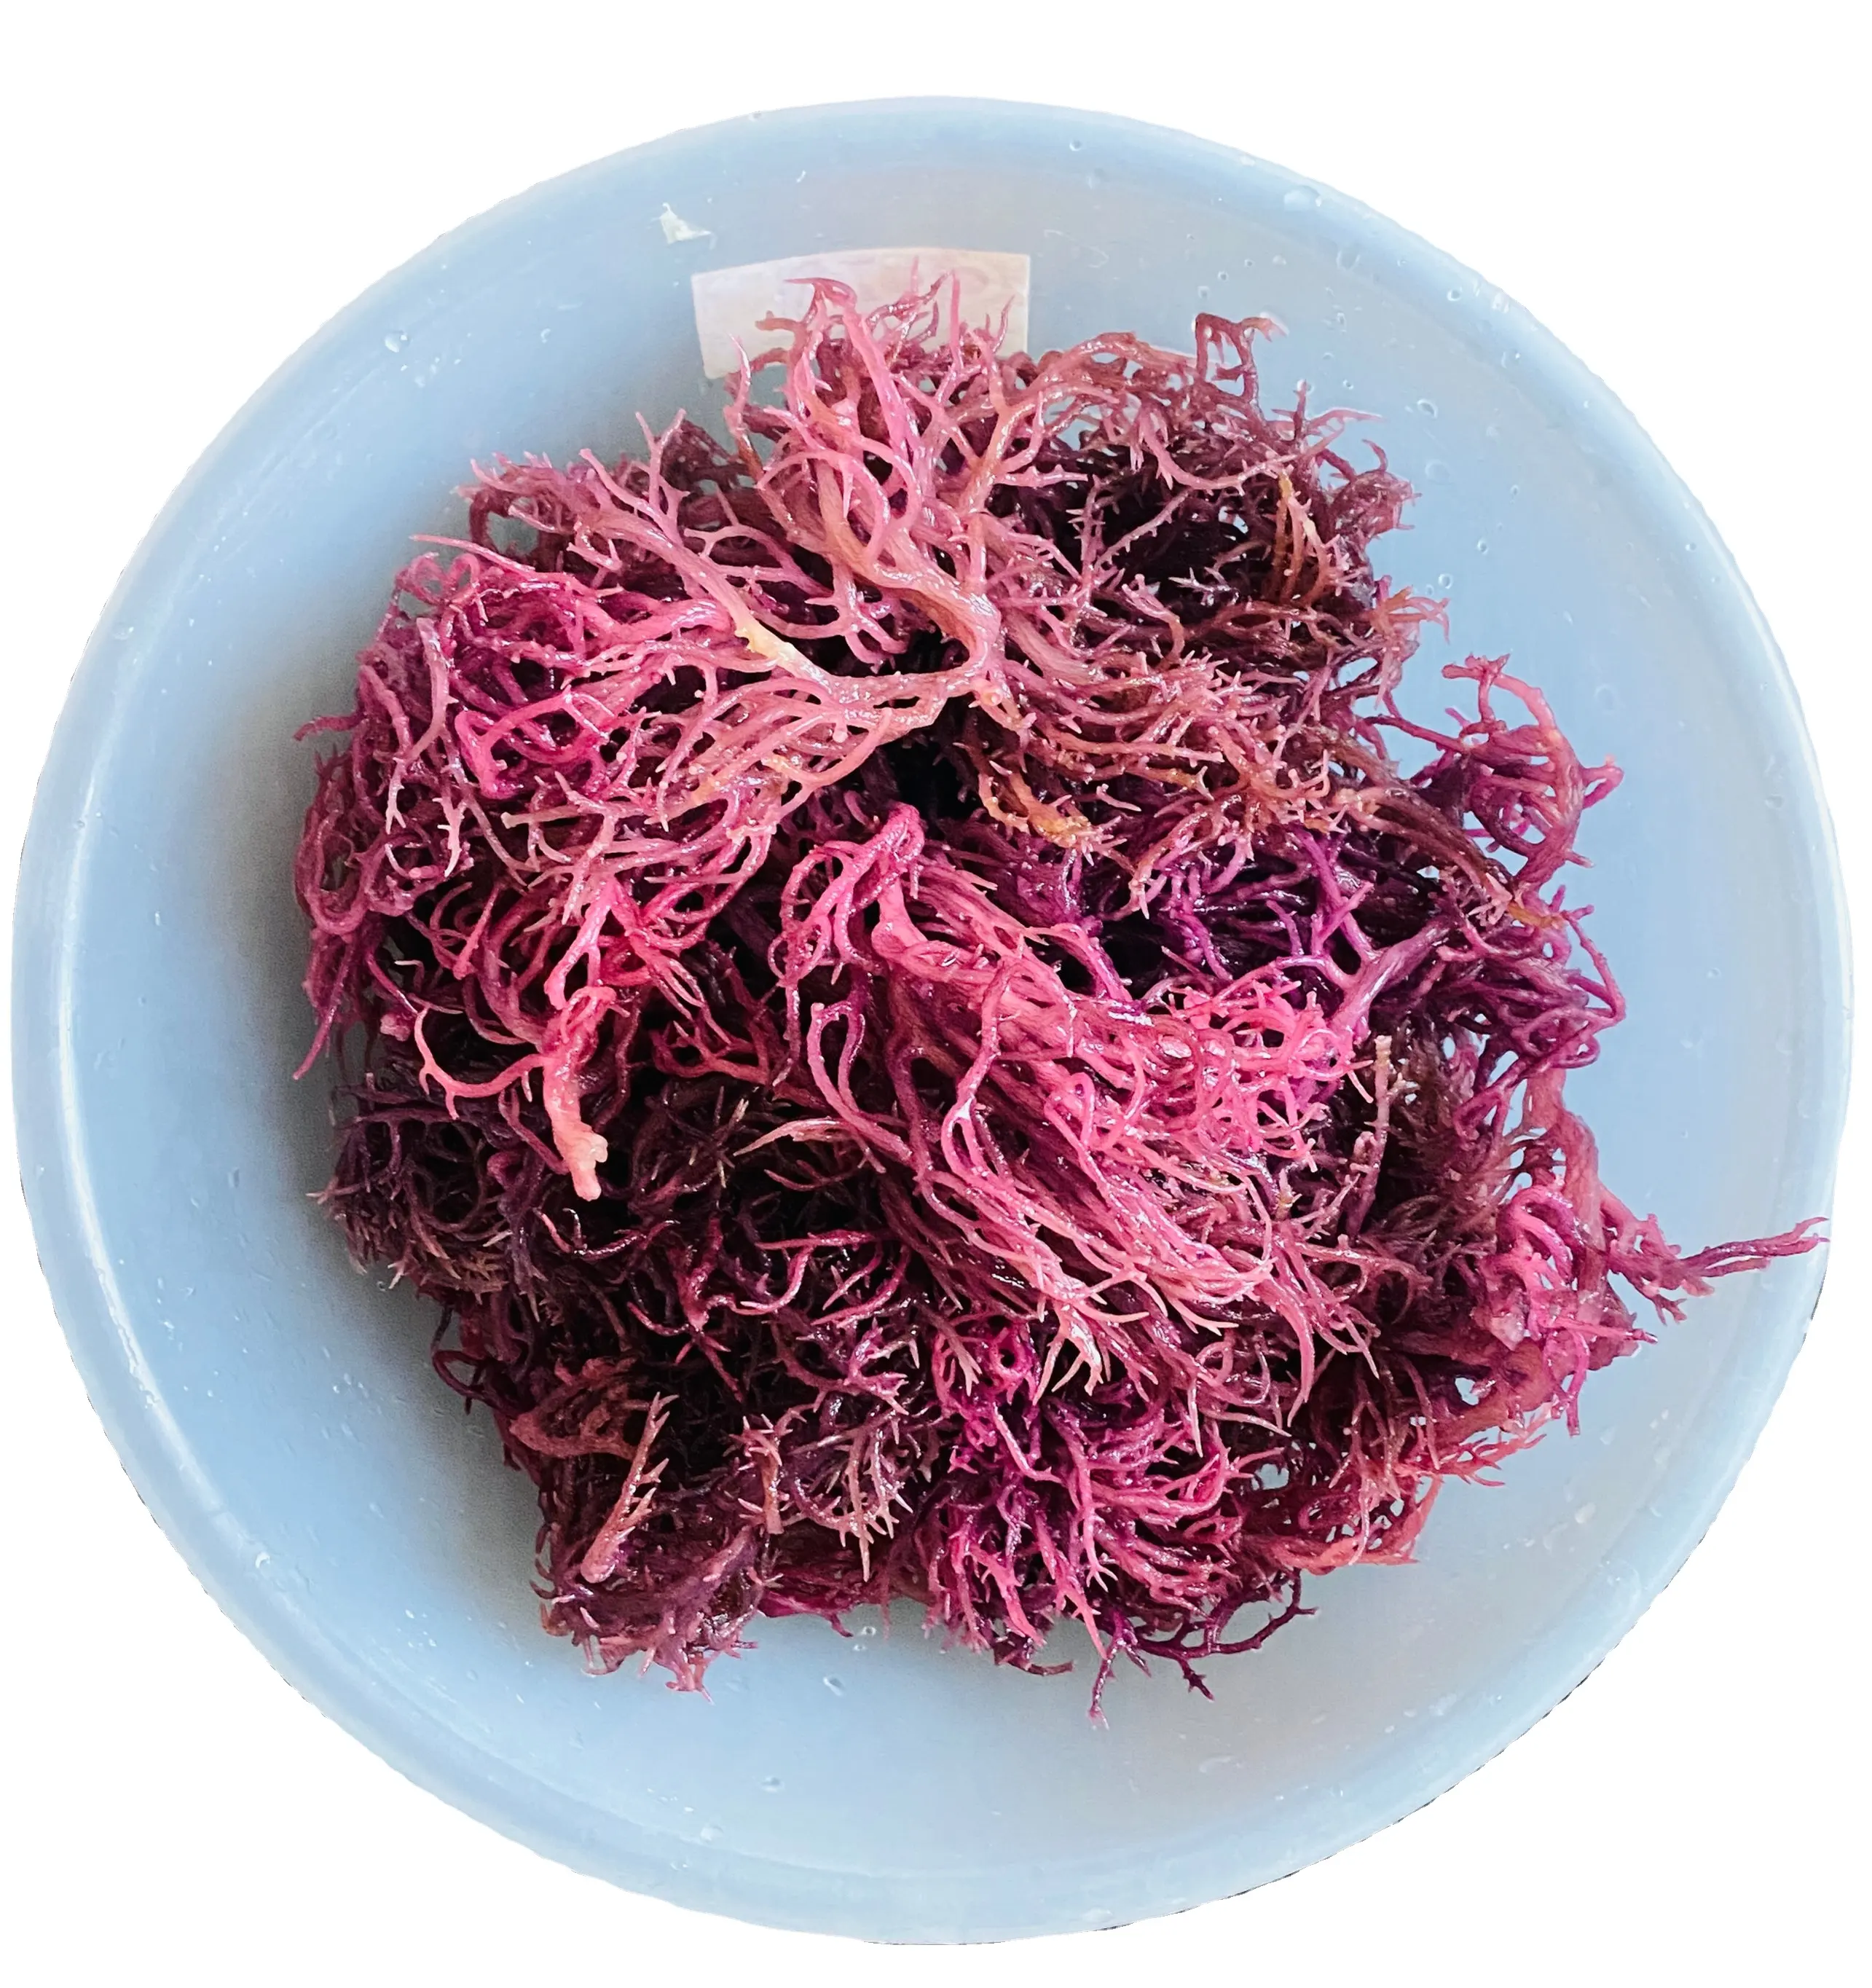 Health natural delicious products dried sea moss - irish moss - seaweed for food - Bella